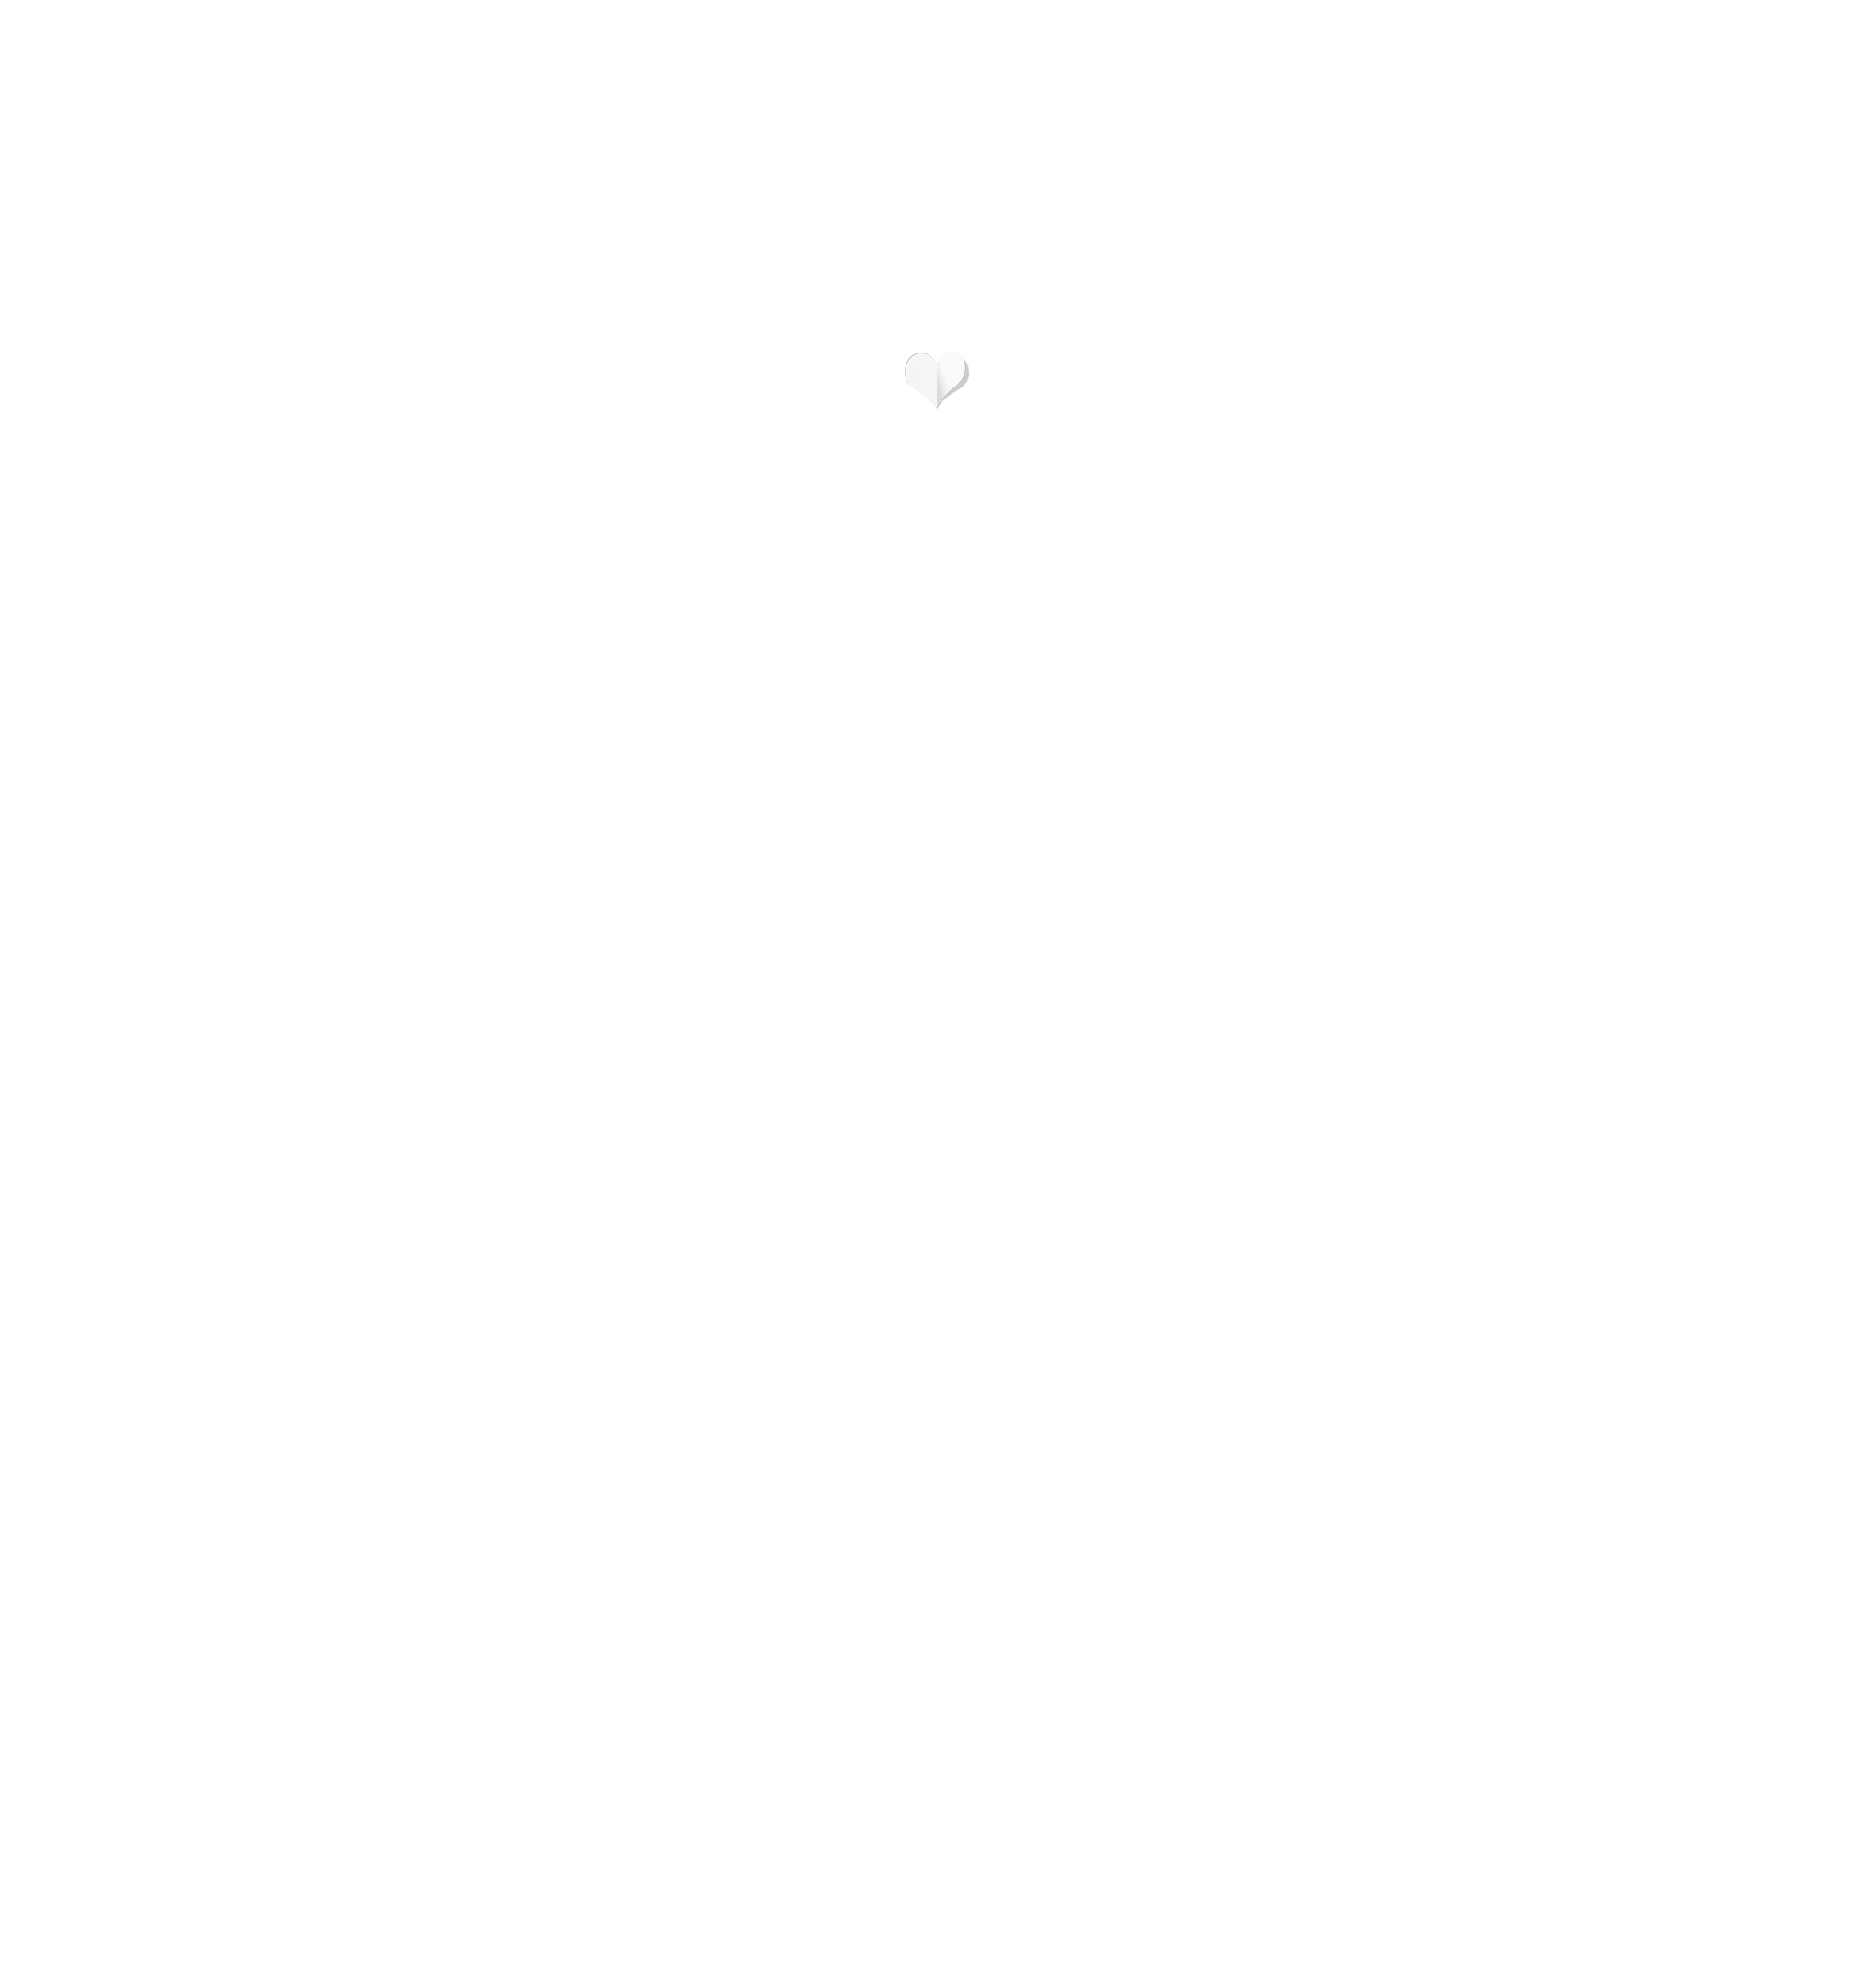 Passionate Youth Ministry